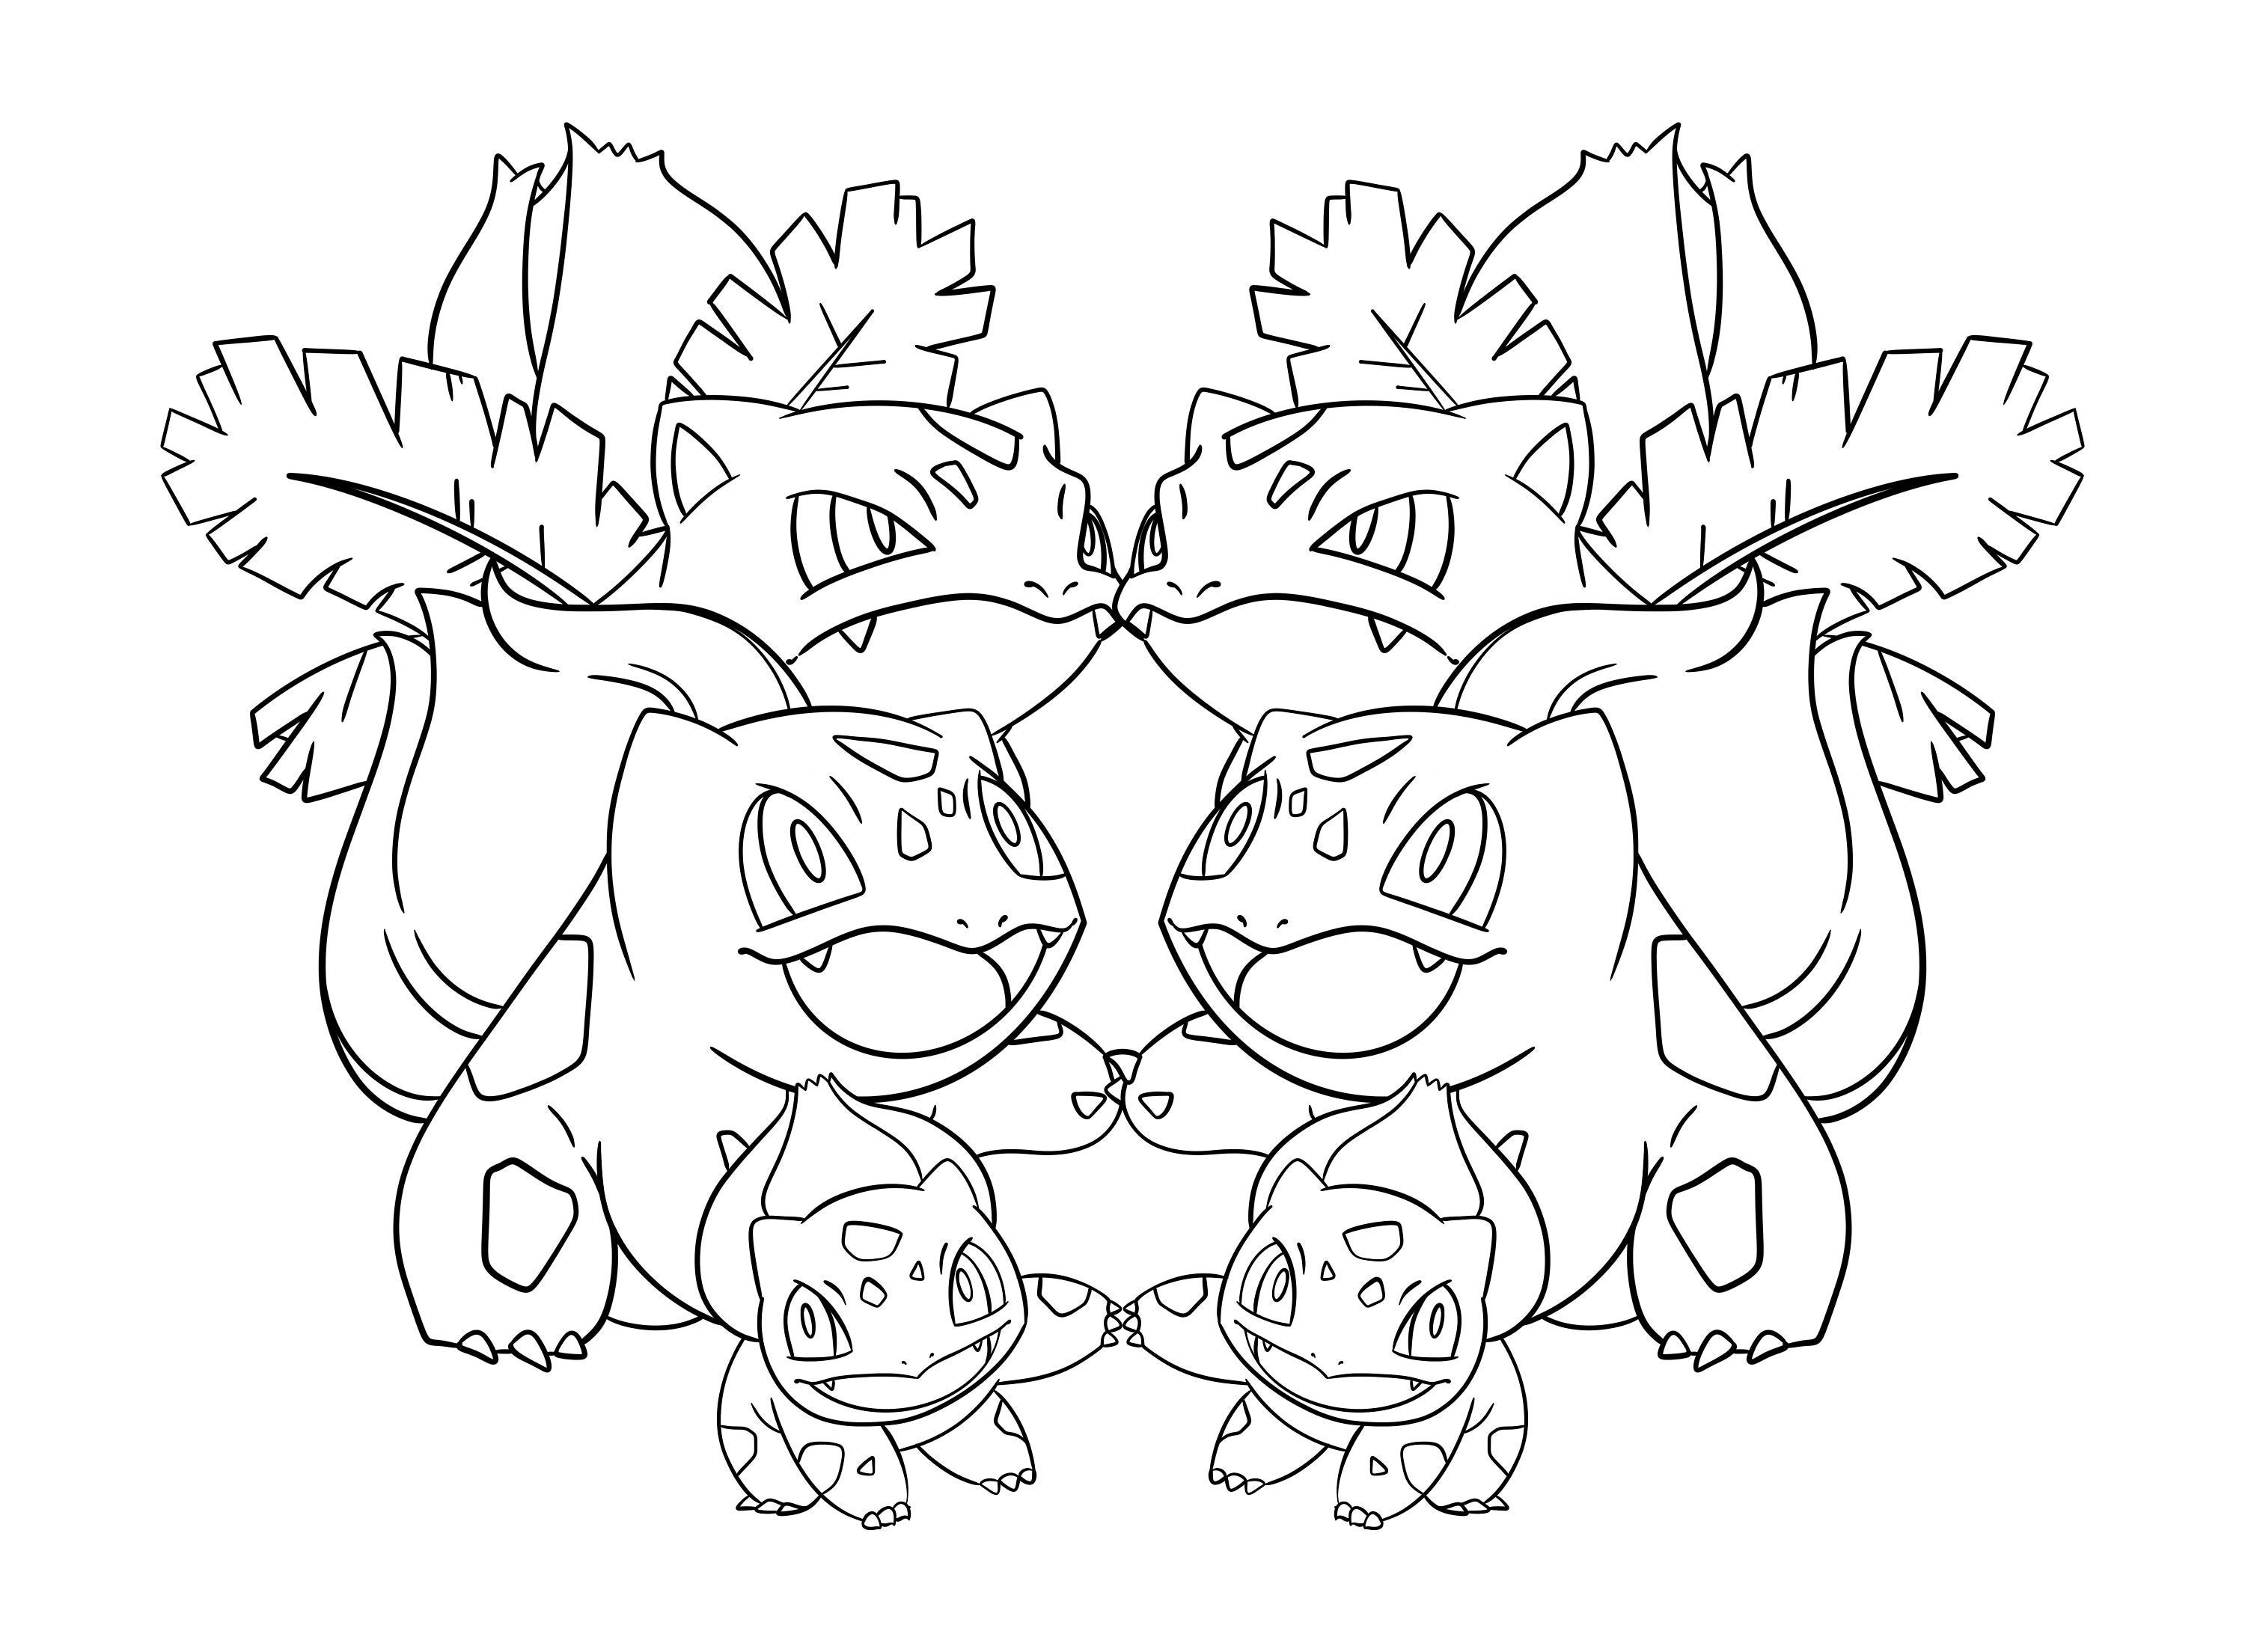 Bulbasaur evolution line colouring page download now